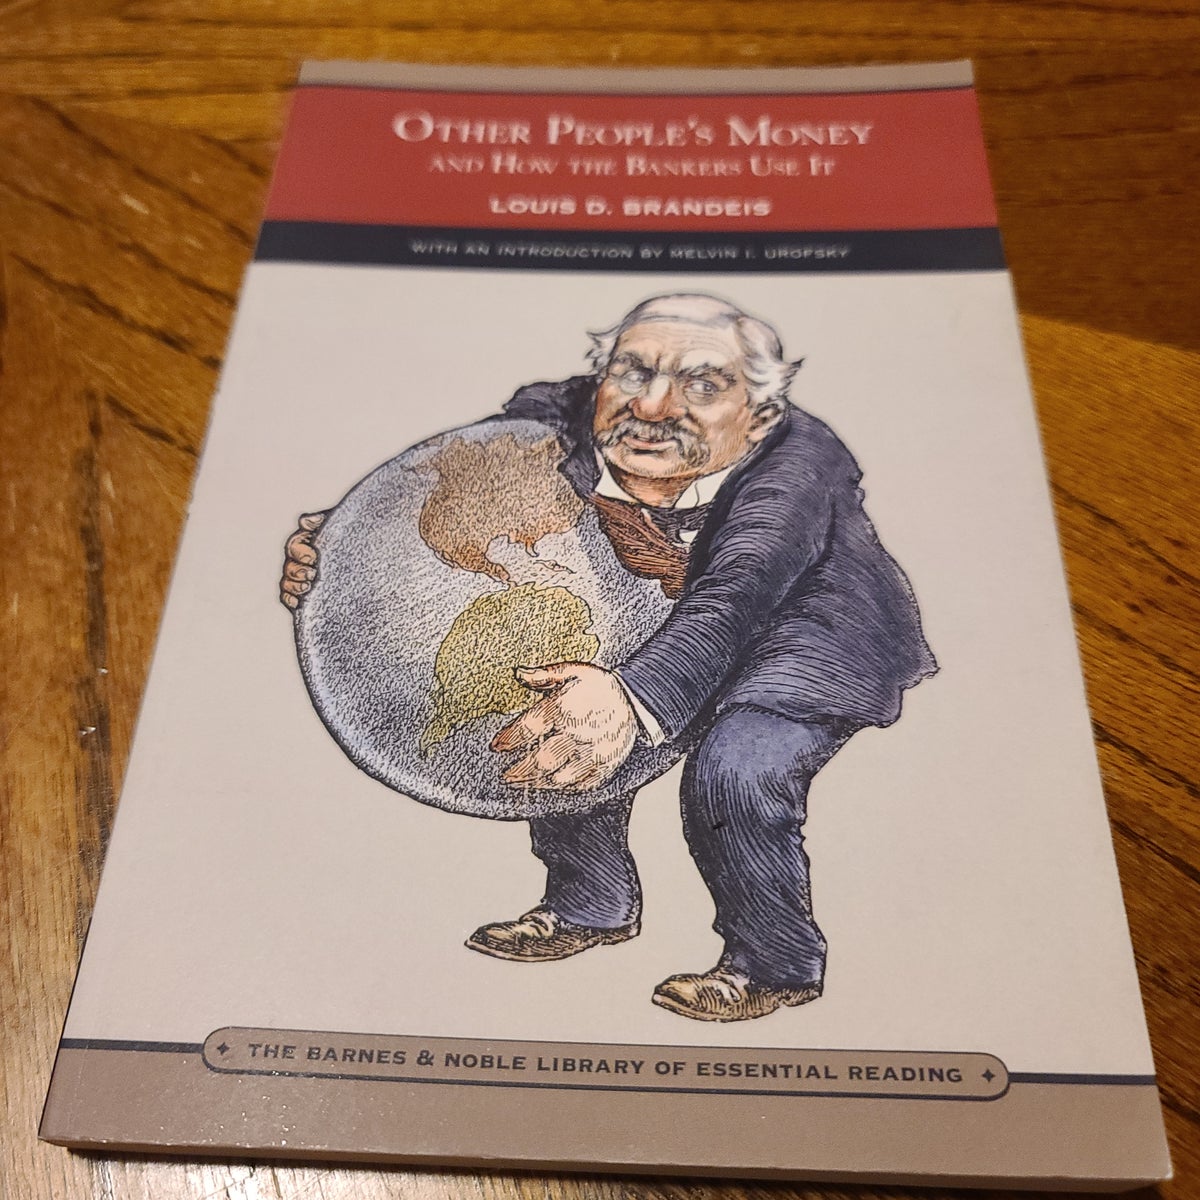 Other People's Money and How The Bankers Use It [Book]